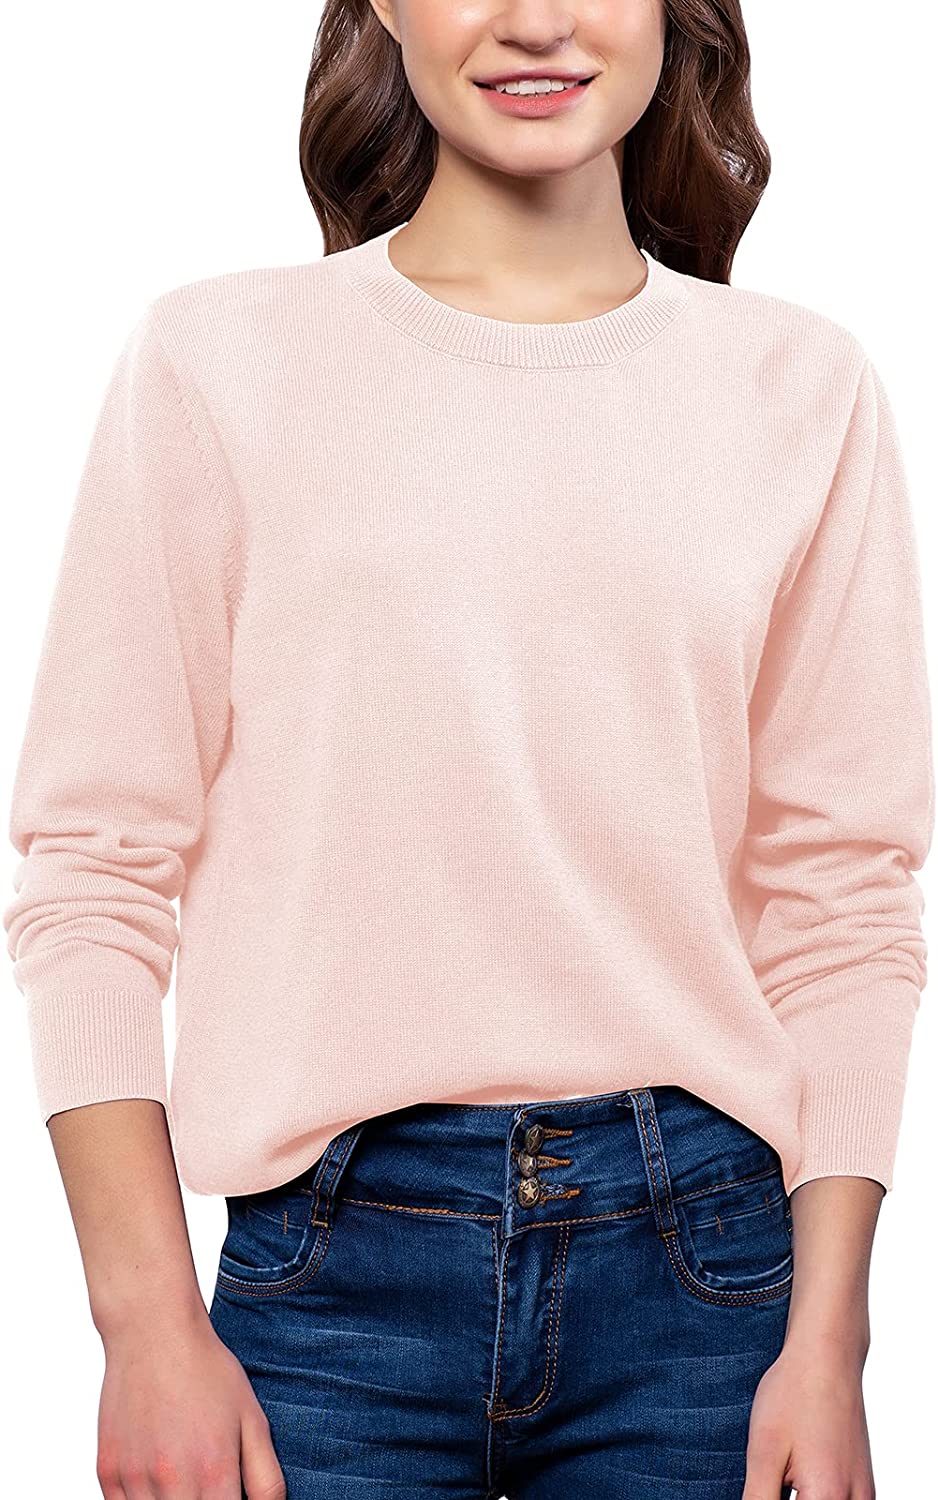 Crewneck Sweaters for Women